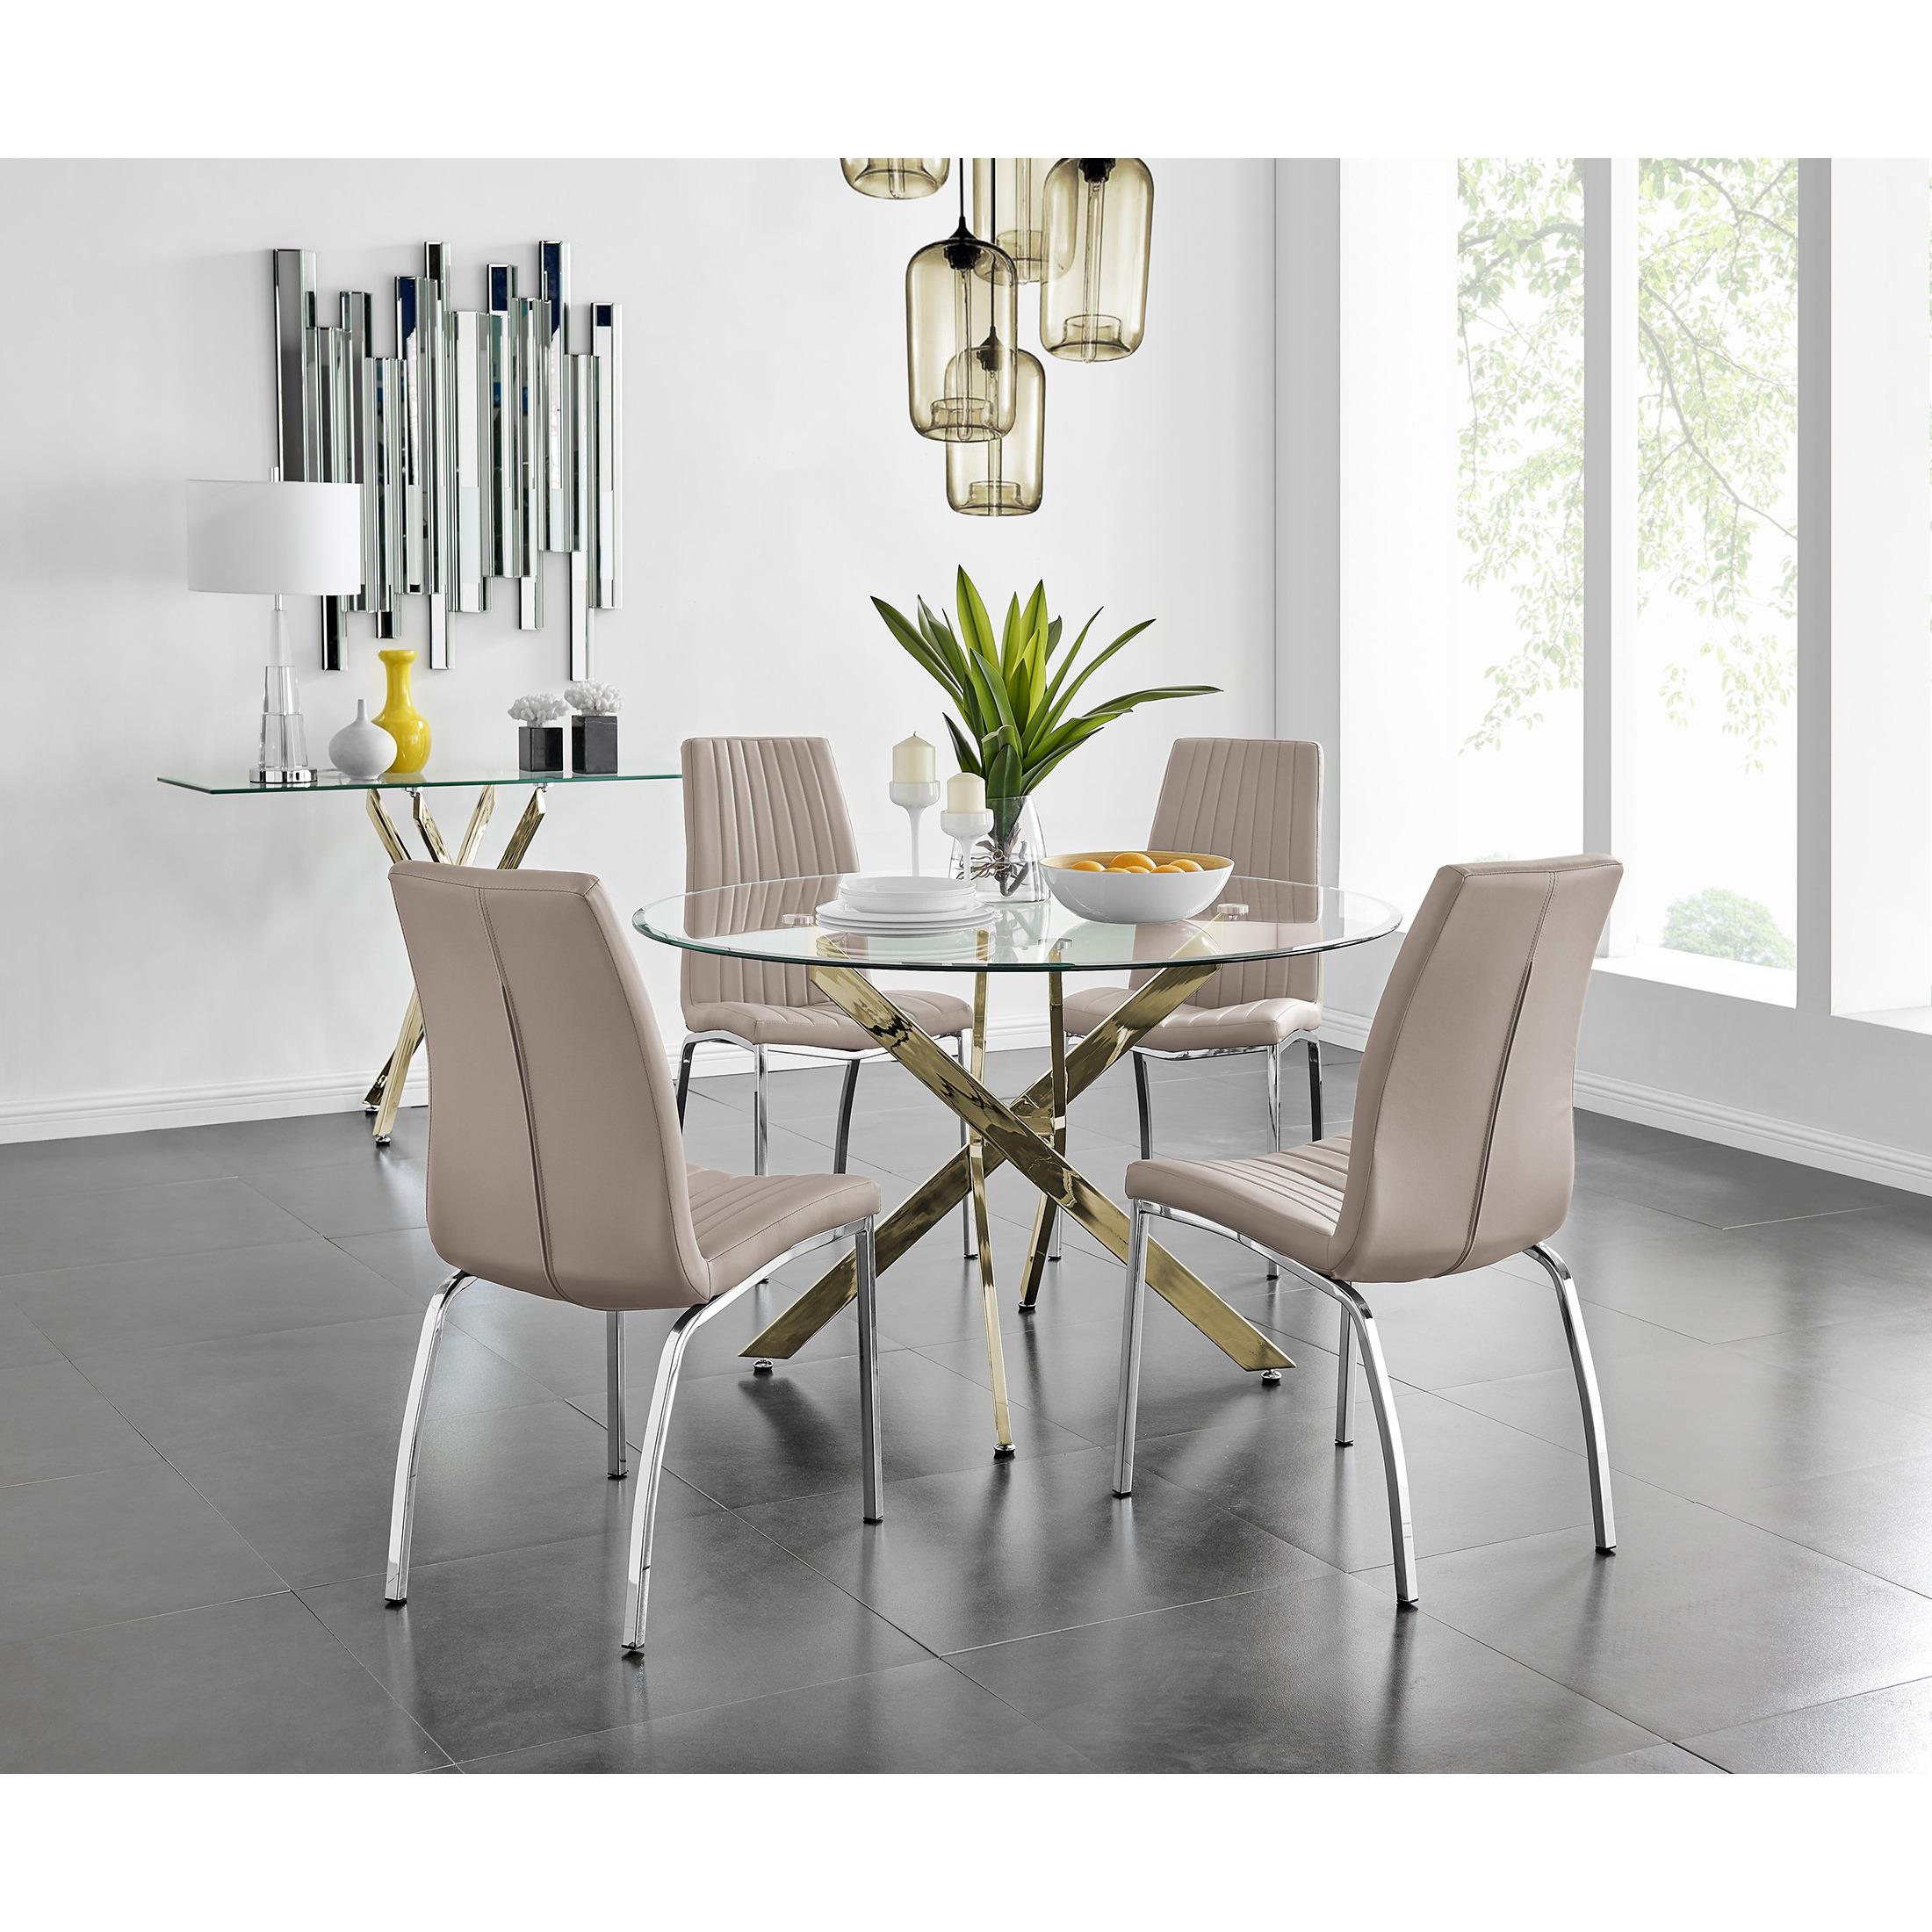 Gold Metal Dining Table & Isco Chairs - Furniturebox